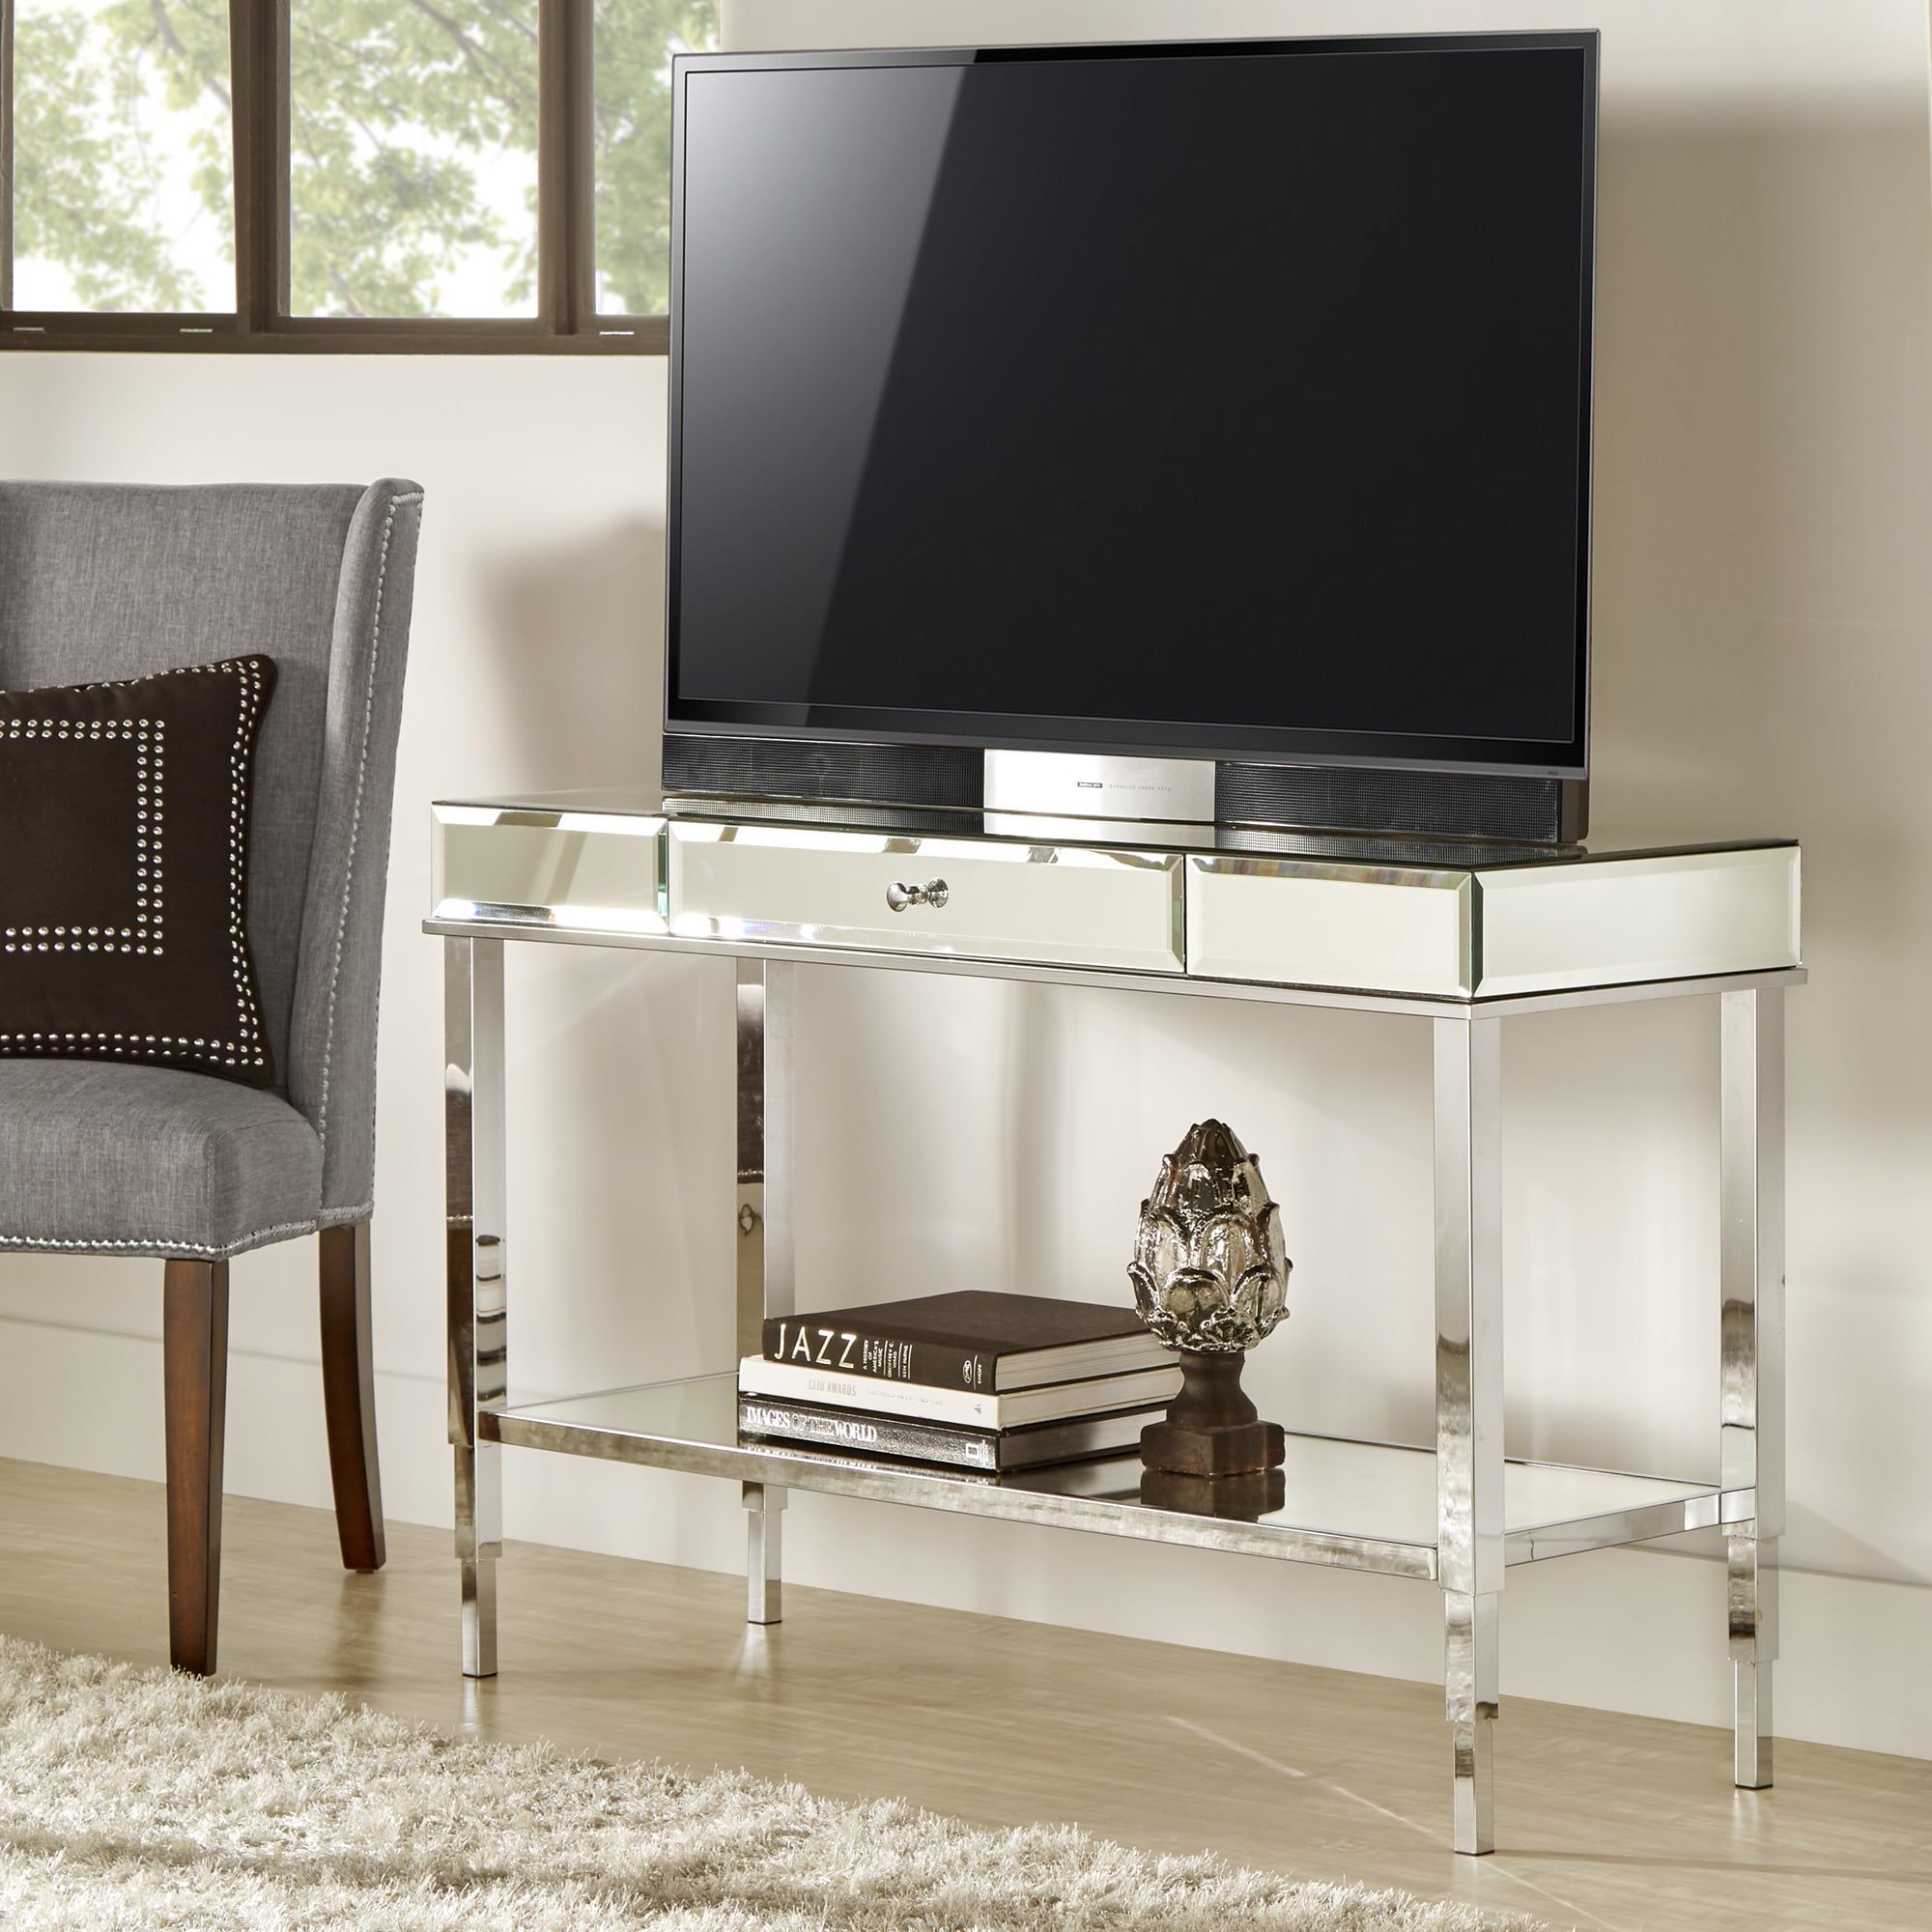 Our Best Living Room Furniture Deals | Mirror Tv Stand, Tv With Regard To Mirror Tv Cabinets (View 11 of 15)